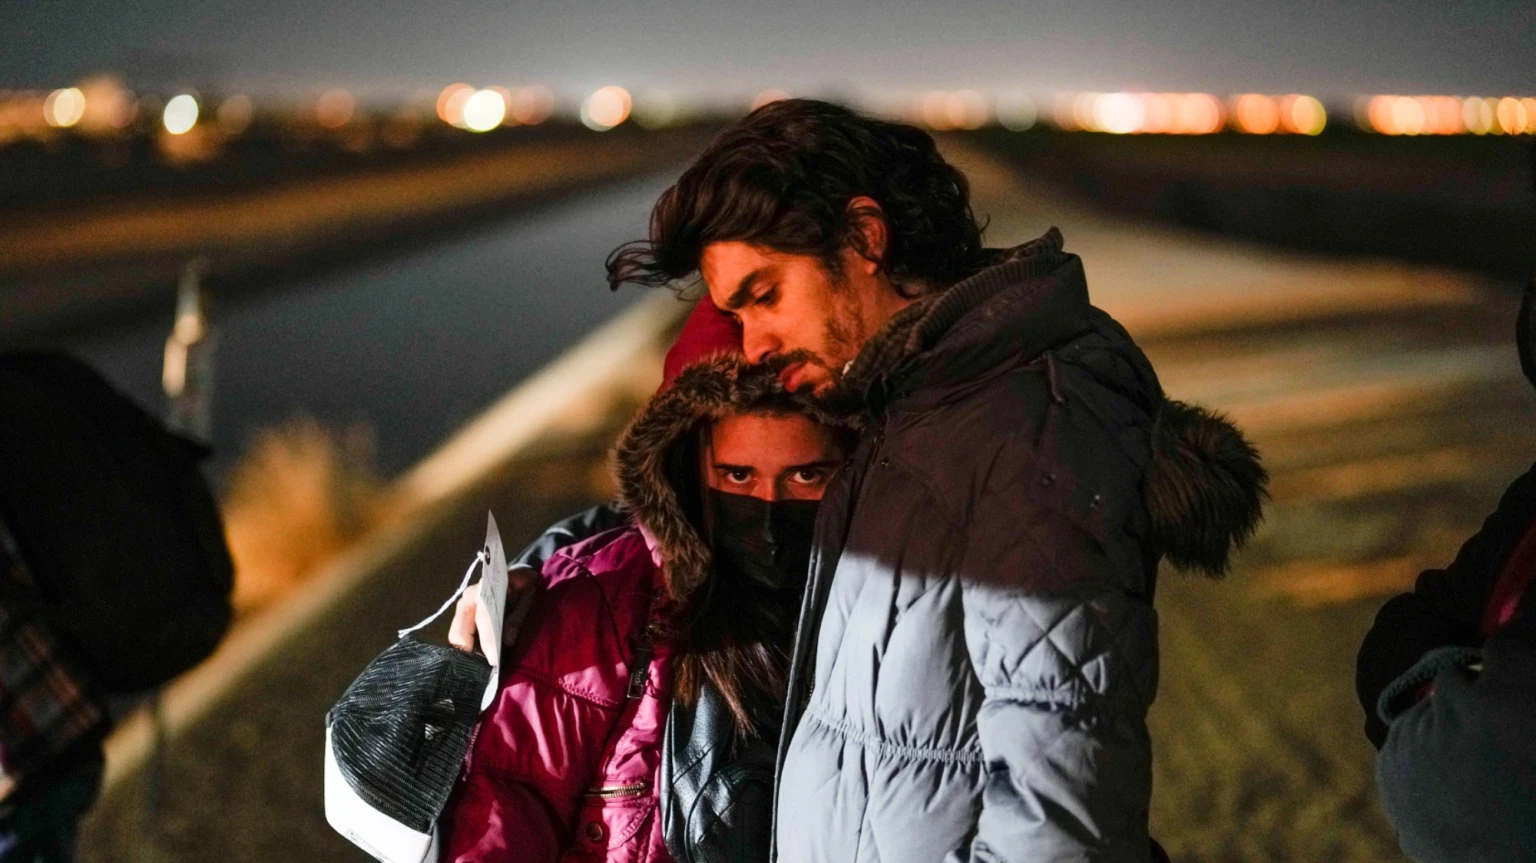 A woman looks at the camera as she leans on a man who has his arm around her. The couple wait to be processed for asylum after crossing the border into the U.S.